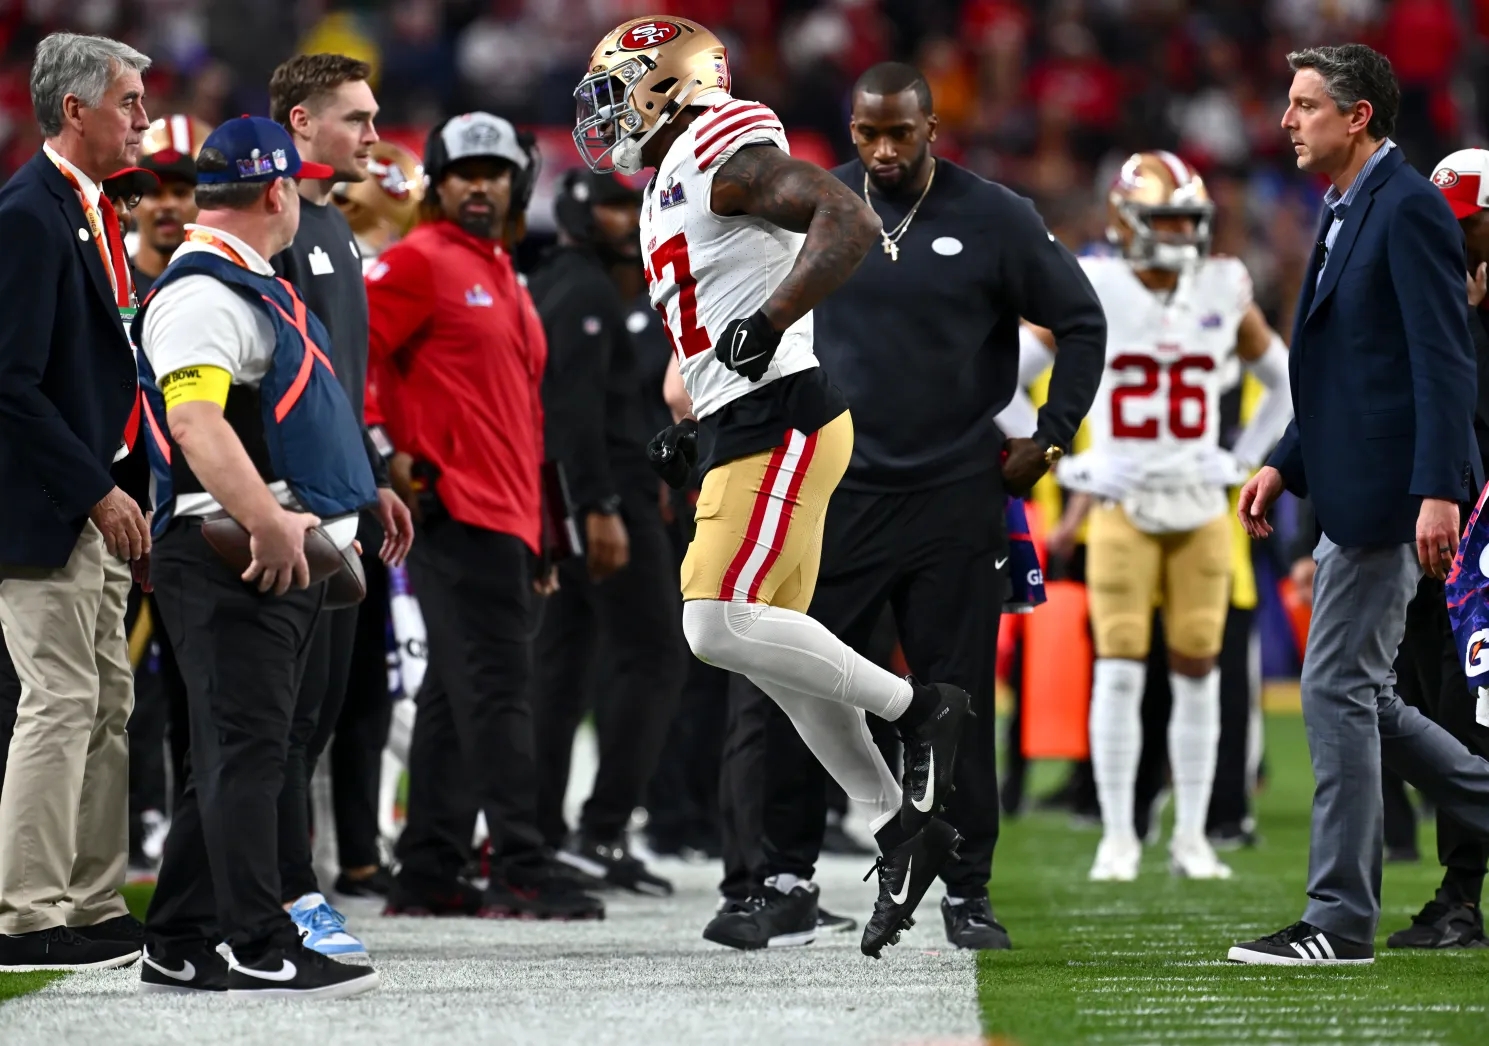 Dre Greenlaw suffered freak torn Achilles during Super Bowl, 49ers confirm